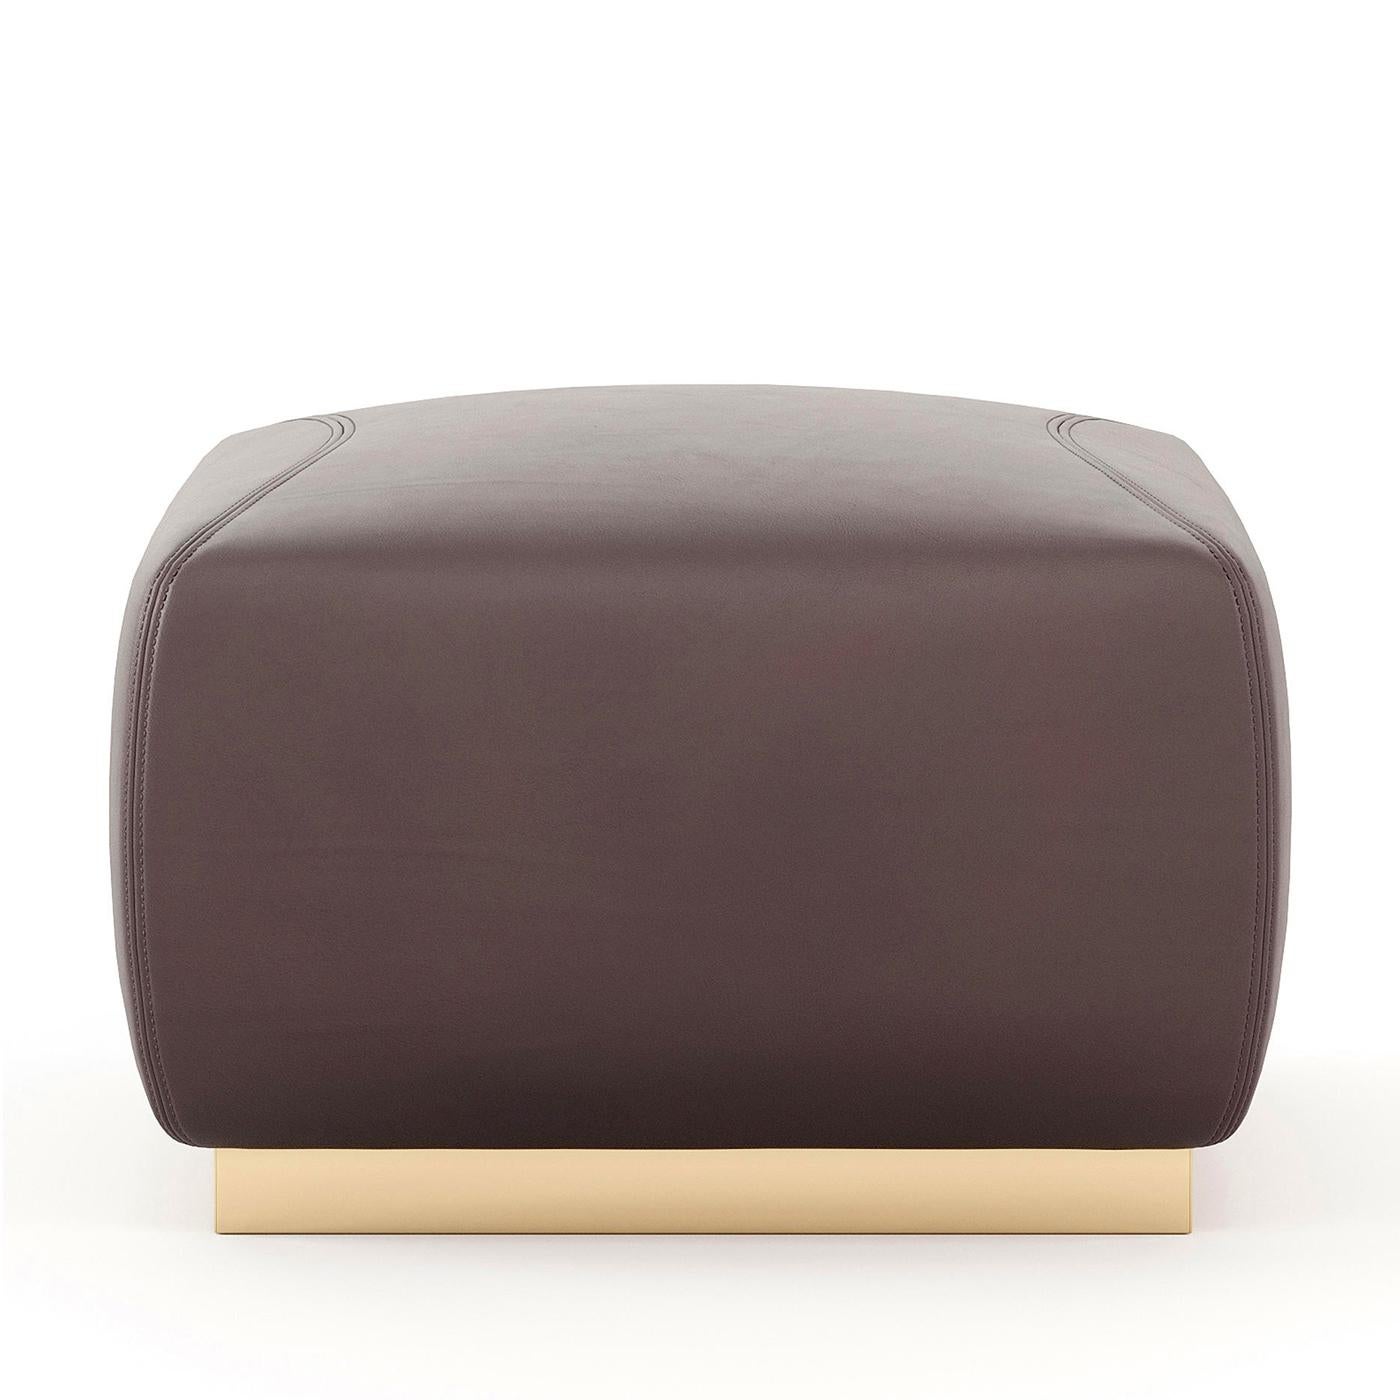 Pouf Lee upholstered and covered with brown genuine leather
with visible stitching. Base in polished stainless steel in gold finish.
Also available on request with other leather colors and also available
with other steel finishes.